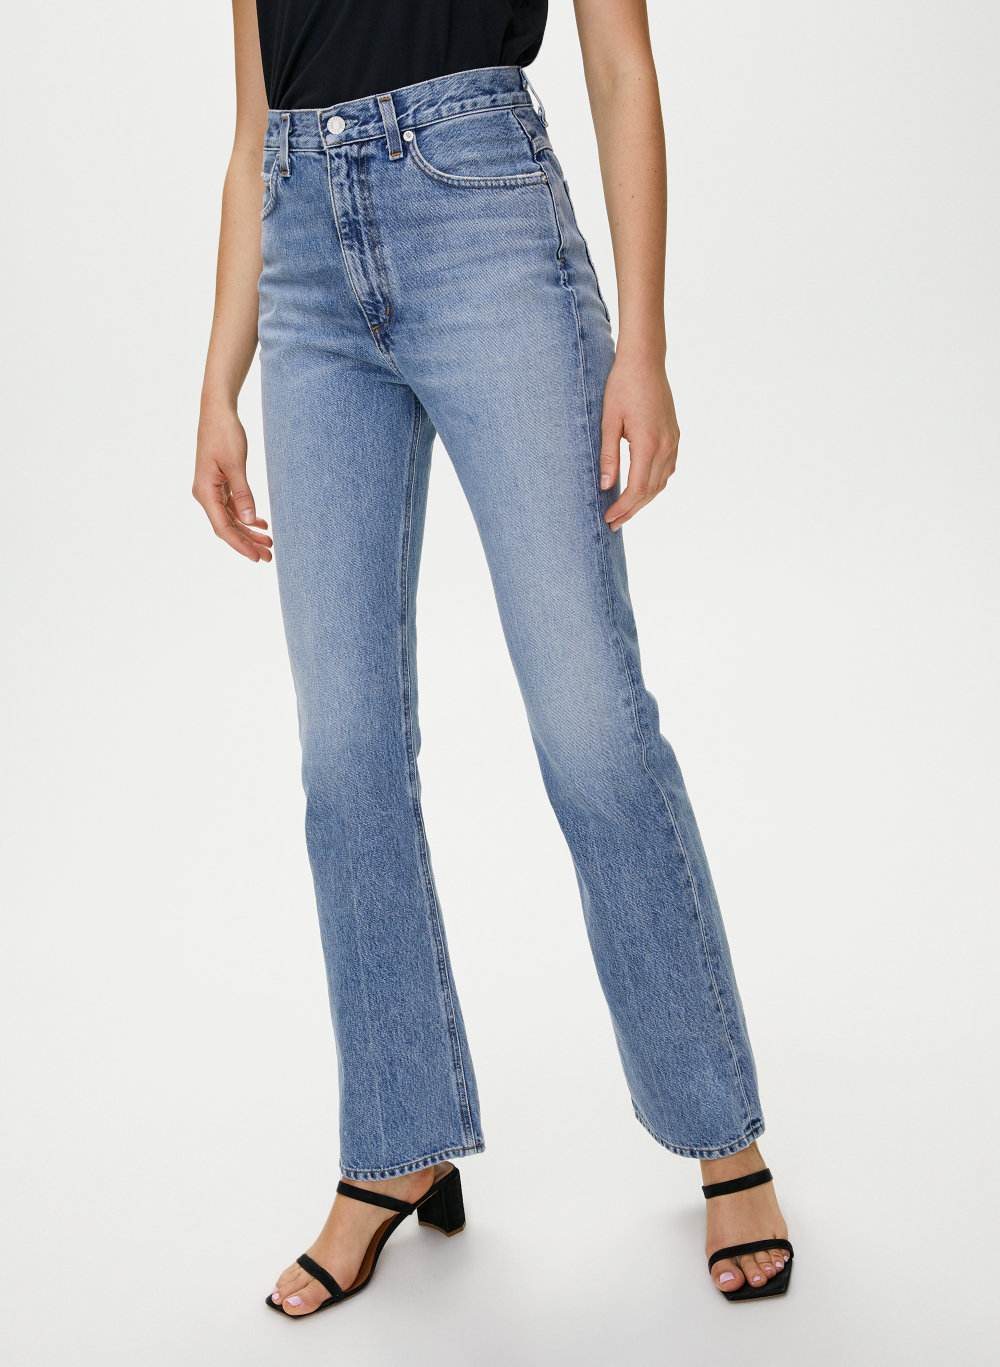 old fashioned high waisted jeans